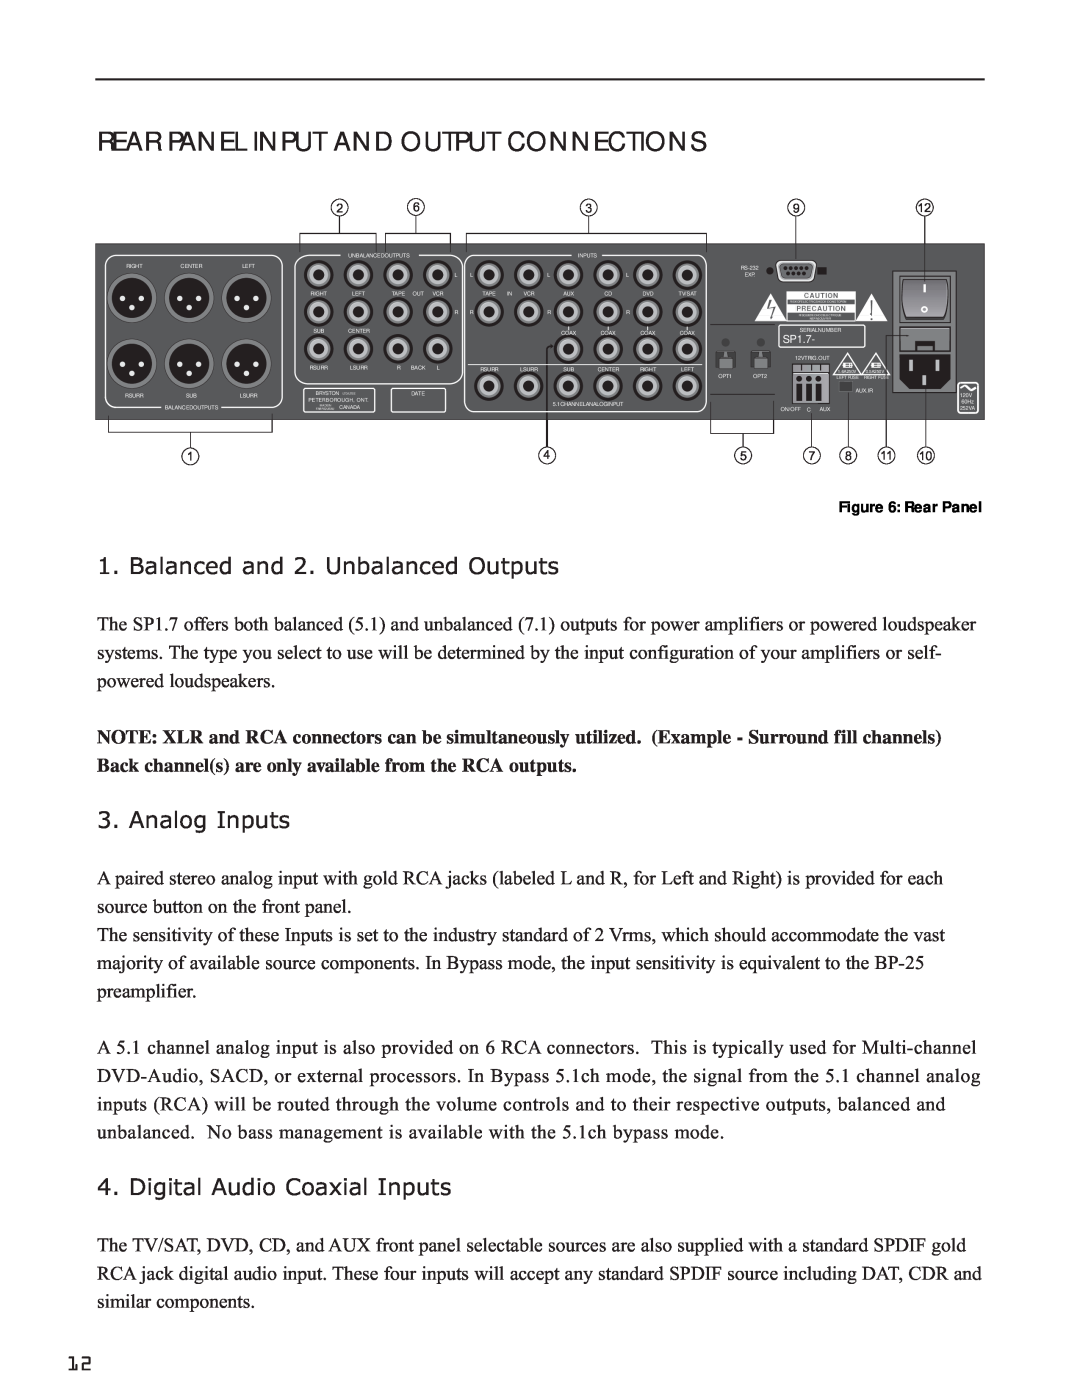 Bryston SP1.7 Series manual Rear Panel Input And Output Connections, Balanced and 2. Unbalanced Outputs, Analog Inputs 